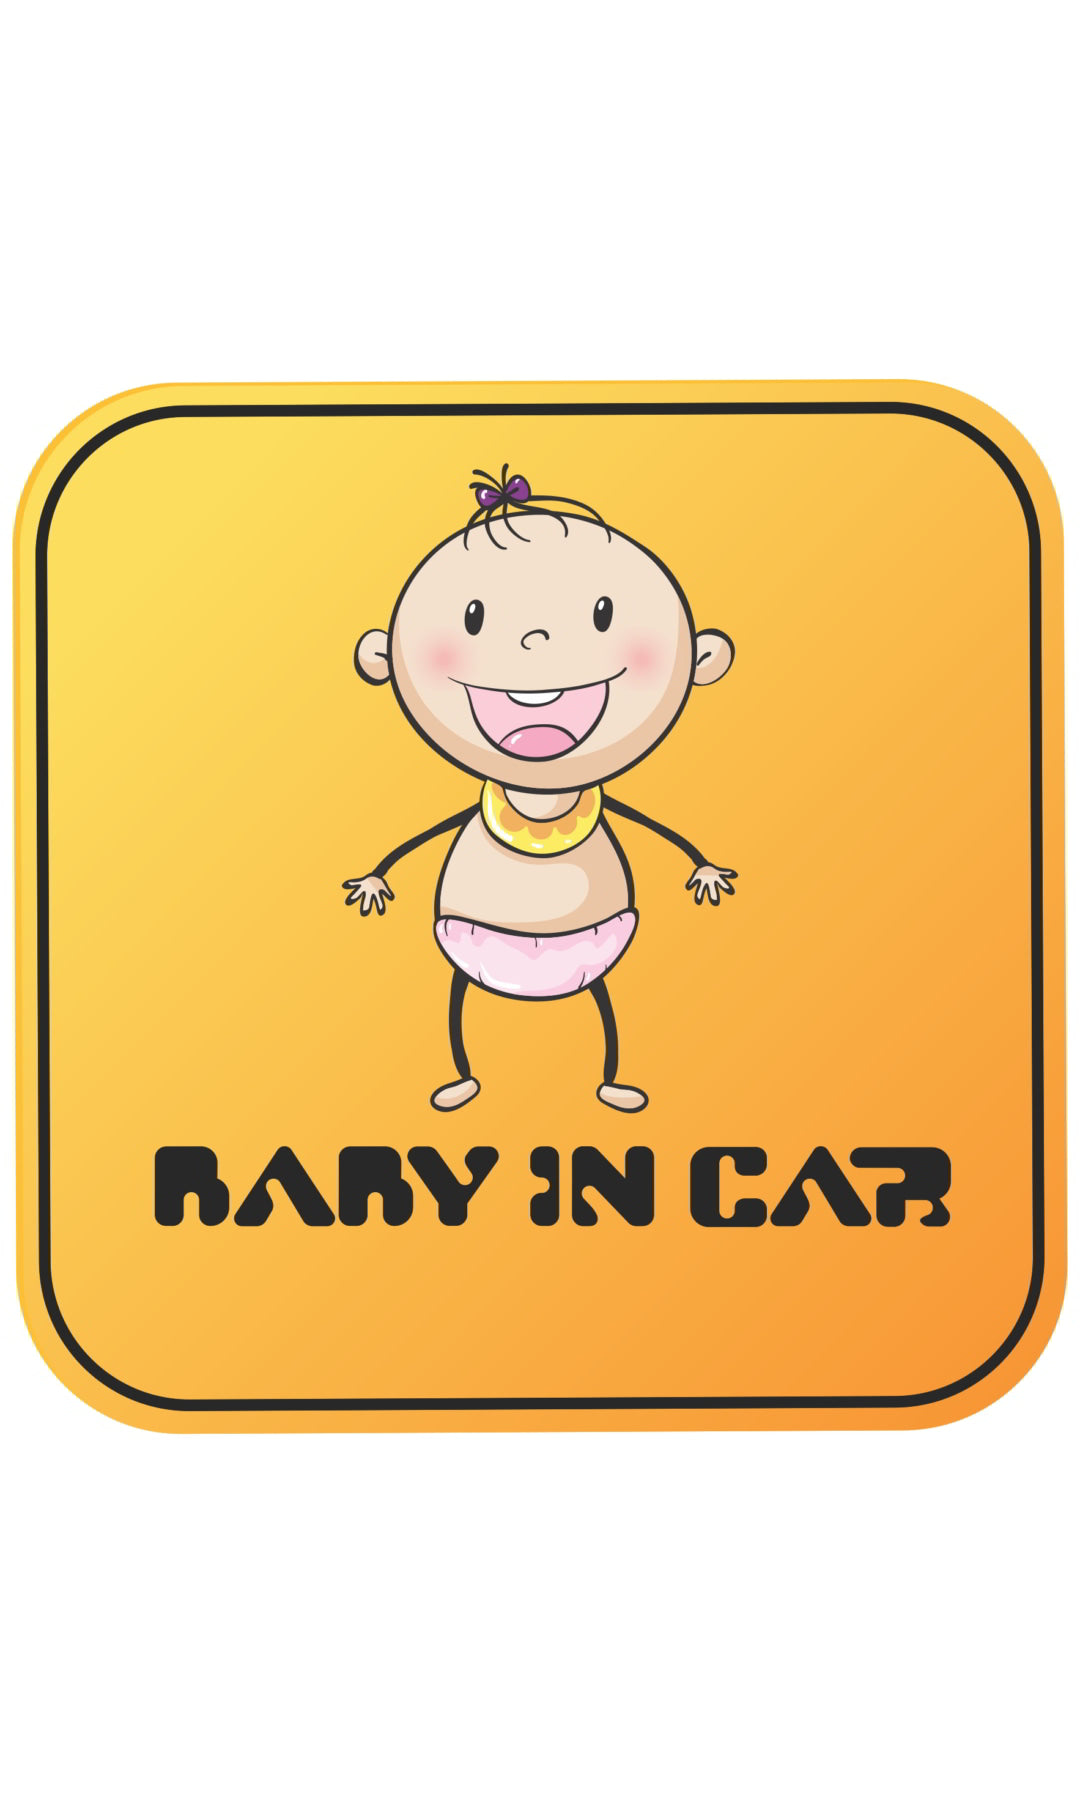 Baby in Car Decal Sticker(2pc)_c9